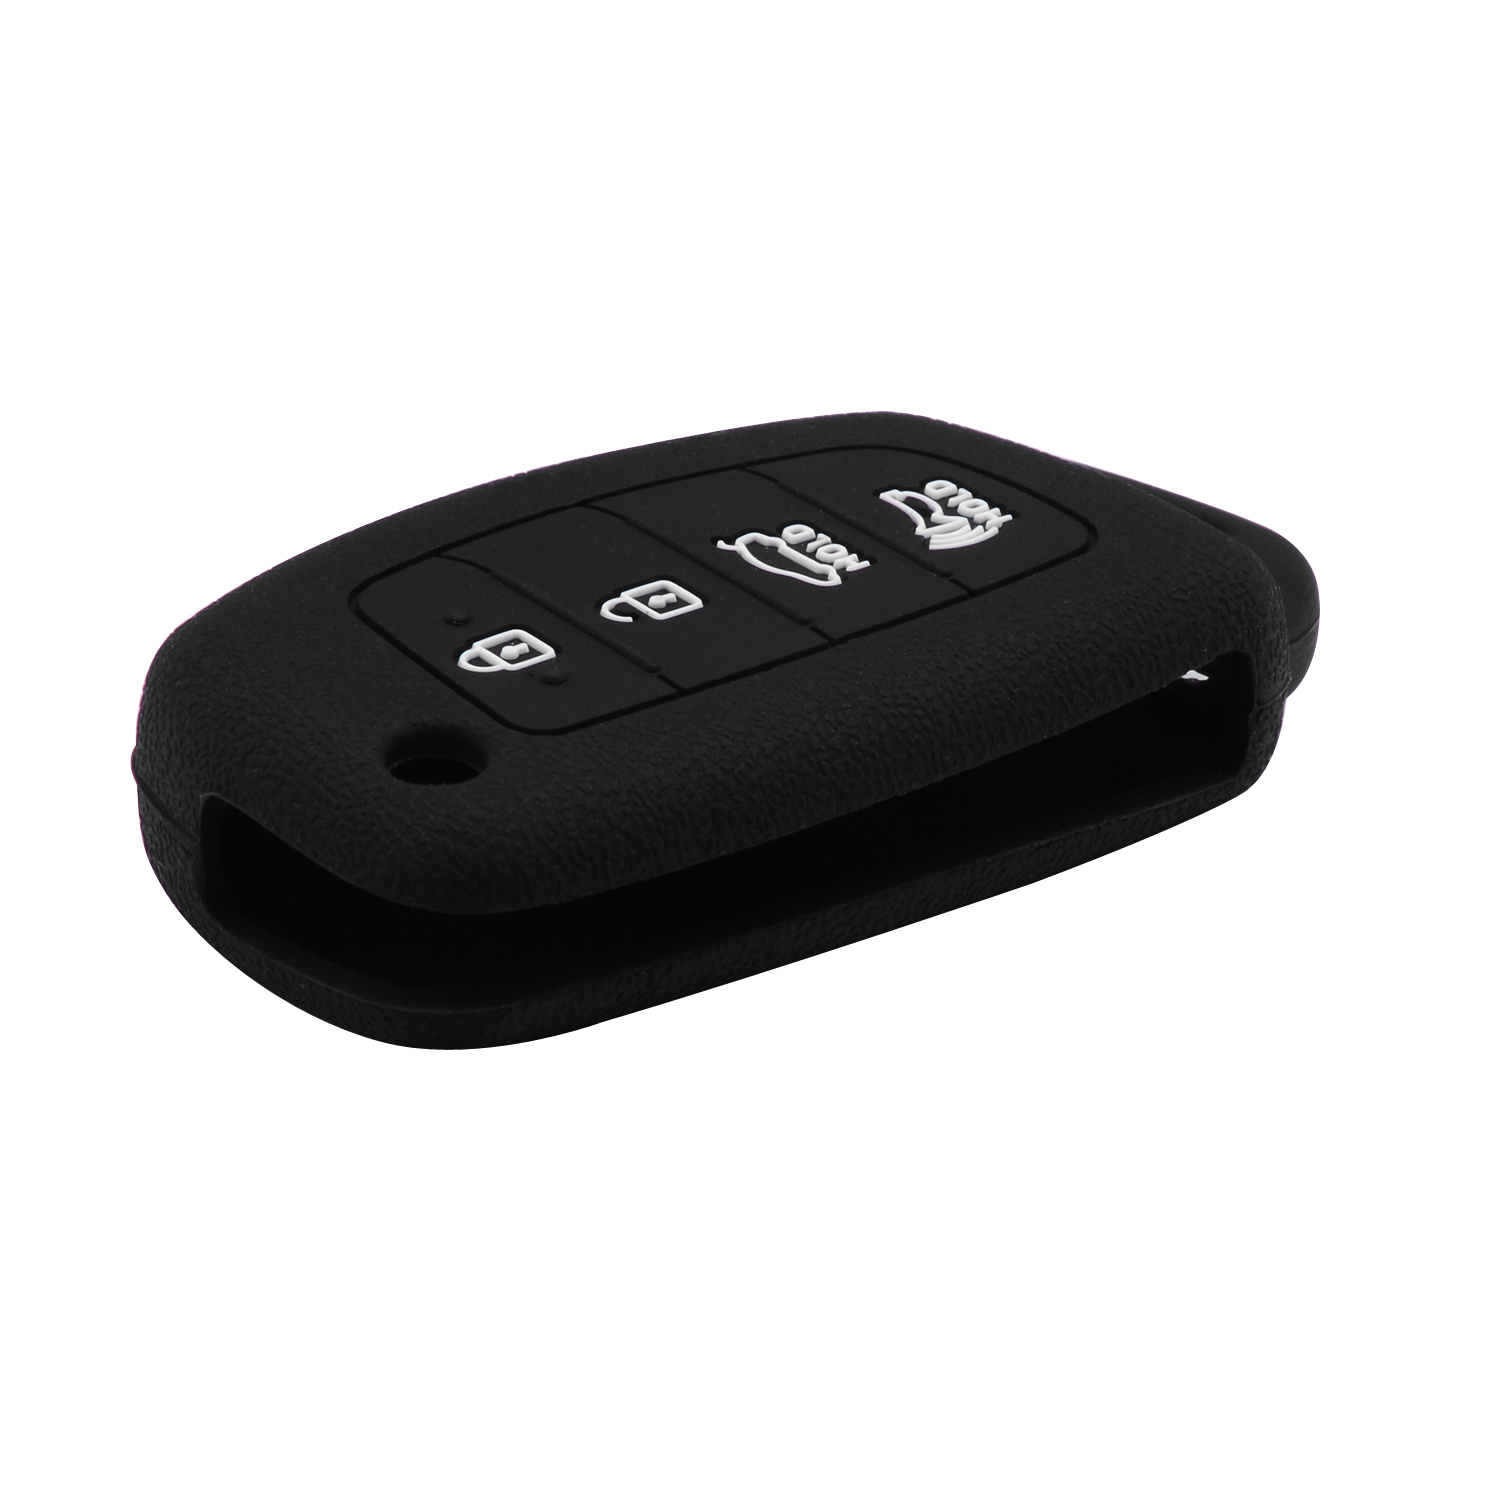 Compatible with Hyundai flip key – Eco-friendly and smart